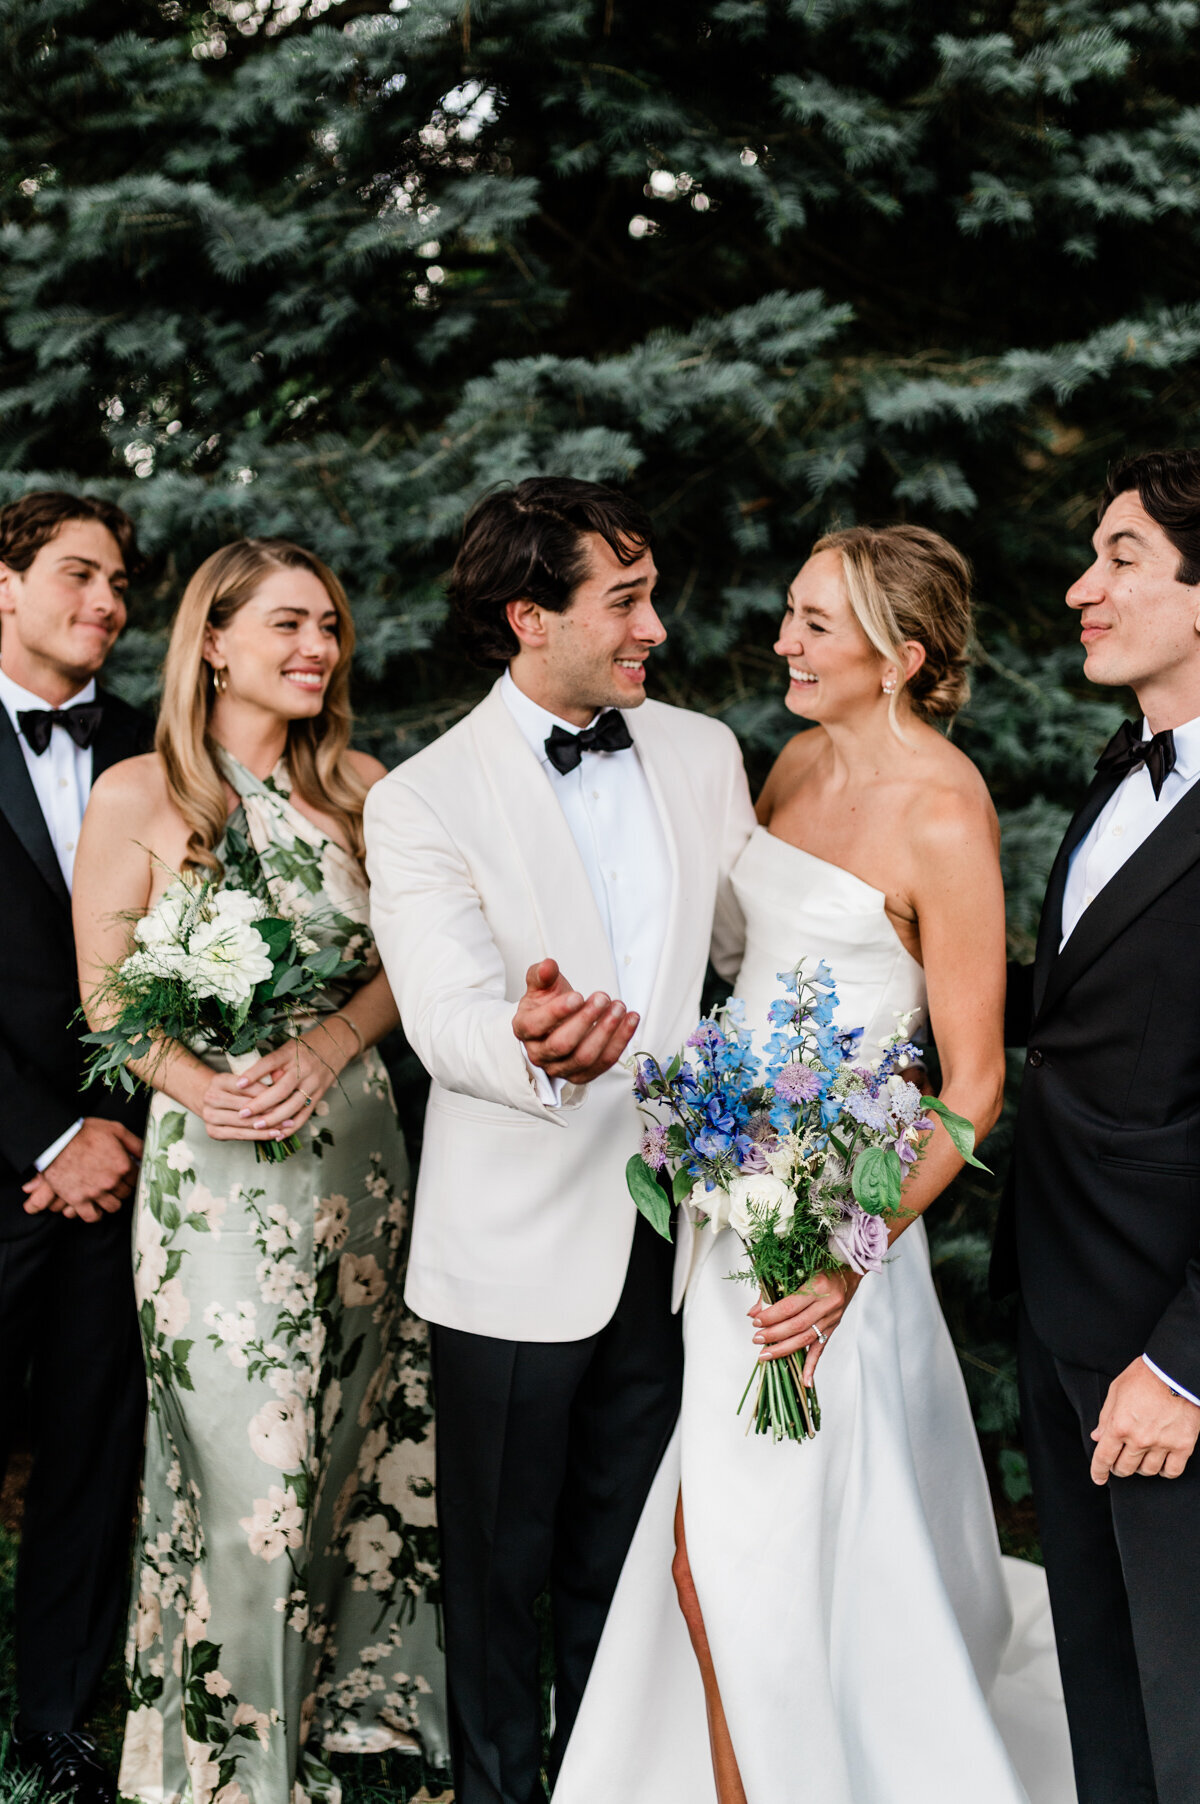 Chic & Sophisticated: Luxury Weddings in Europe. Elevate your wedding experience with our refined approach to capturing the most precious moments of your celebration.